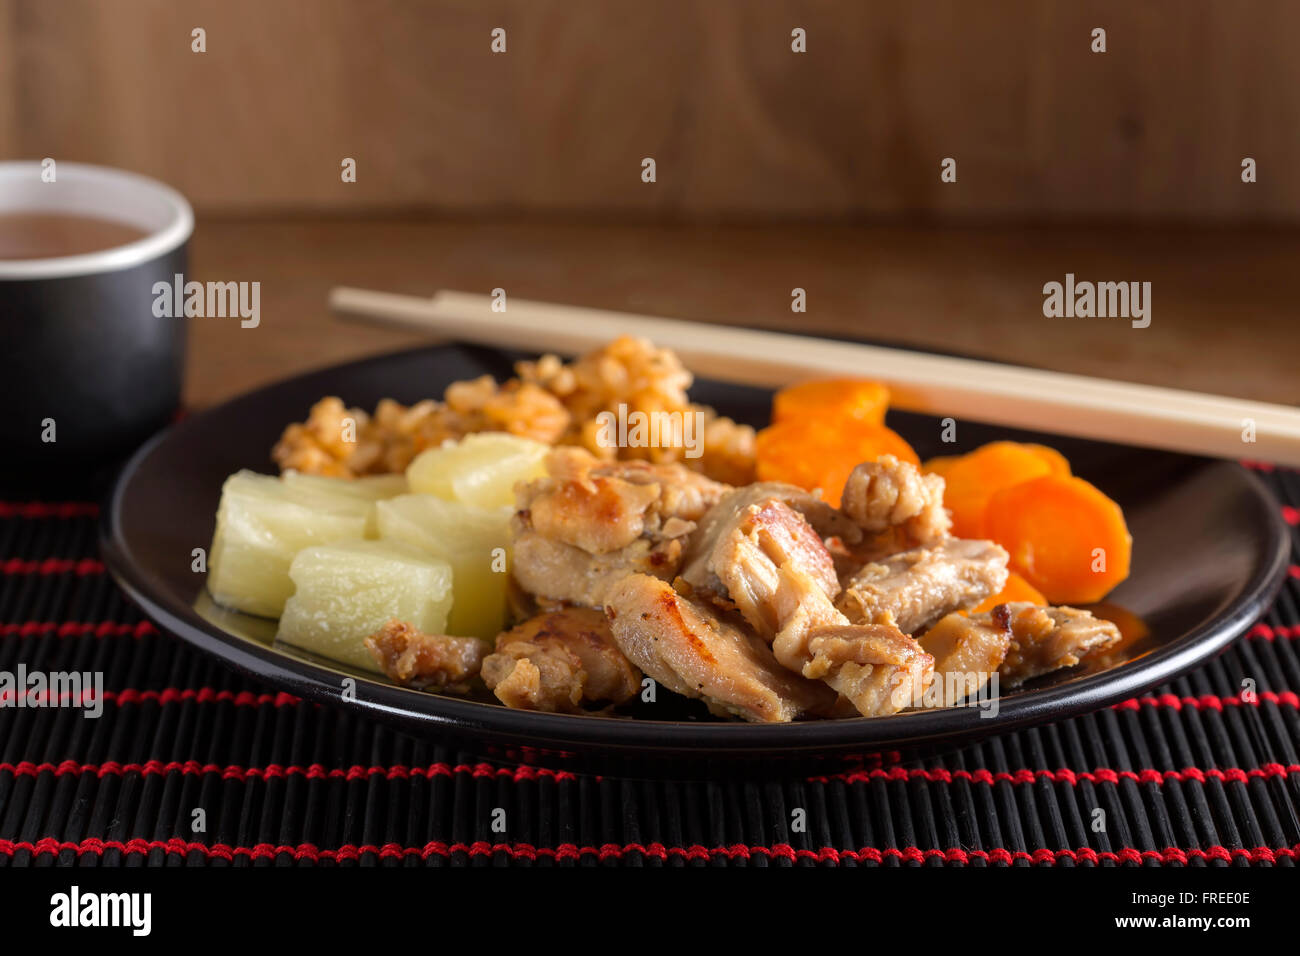 Chinese food - fried chicken sweet sour with vegetable Stock Photo